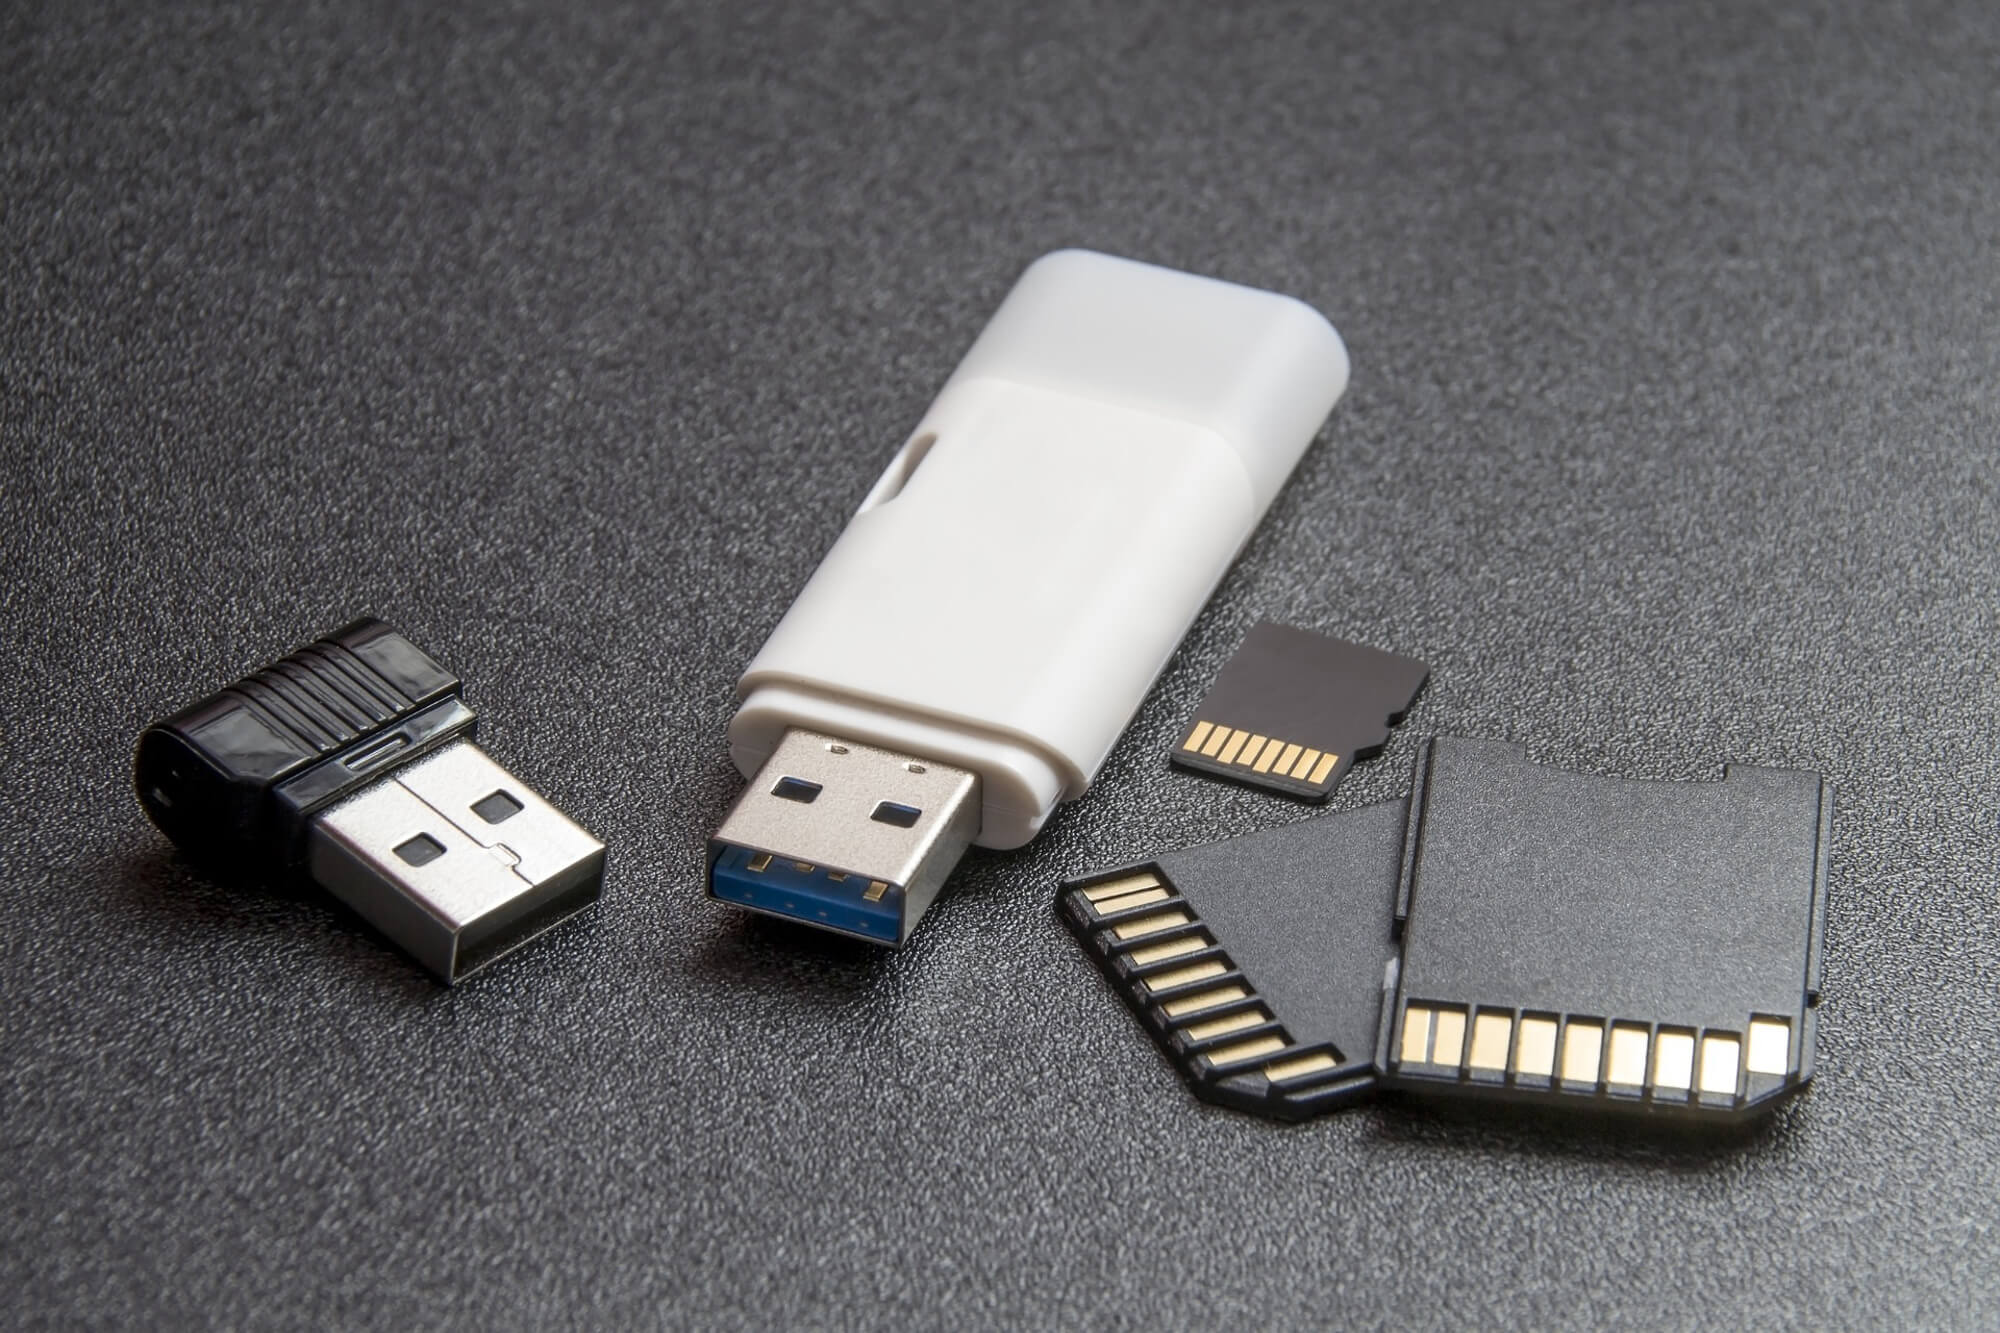 Wireless dongle, USB drive, micro SD chip, and 2 SD chips on a field of black